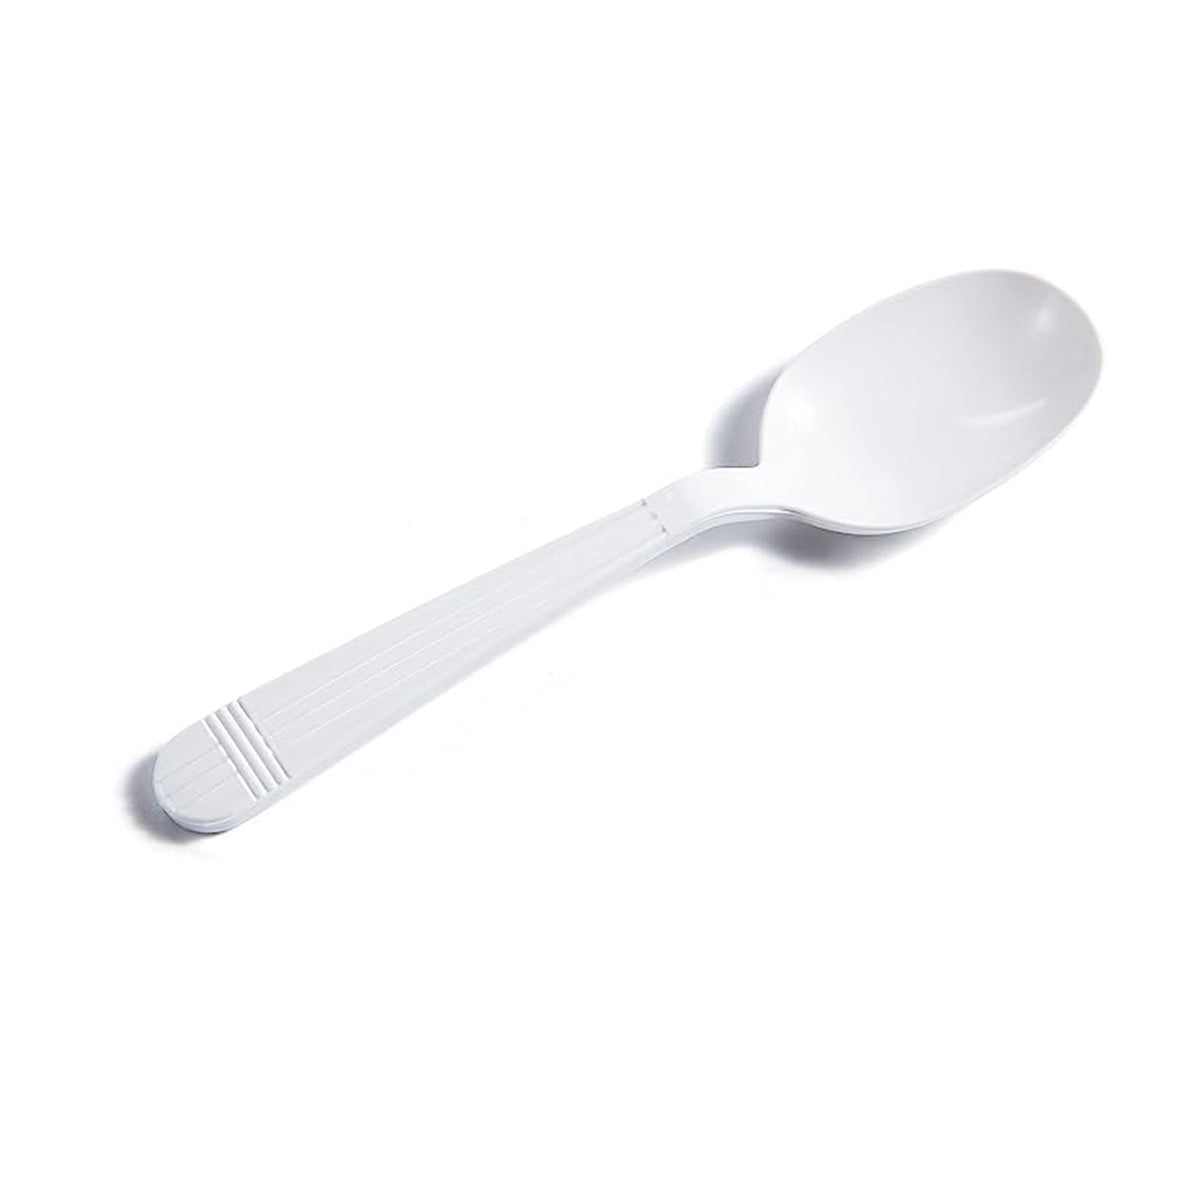 CIAO! Heavy Weight Disposable White Soupspoons Polypropylene (Case of 1,000)